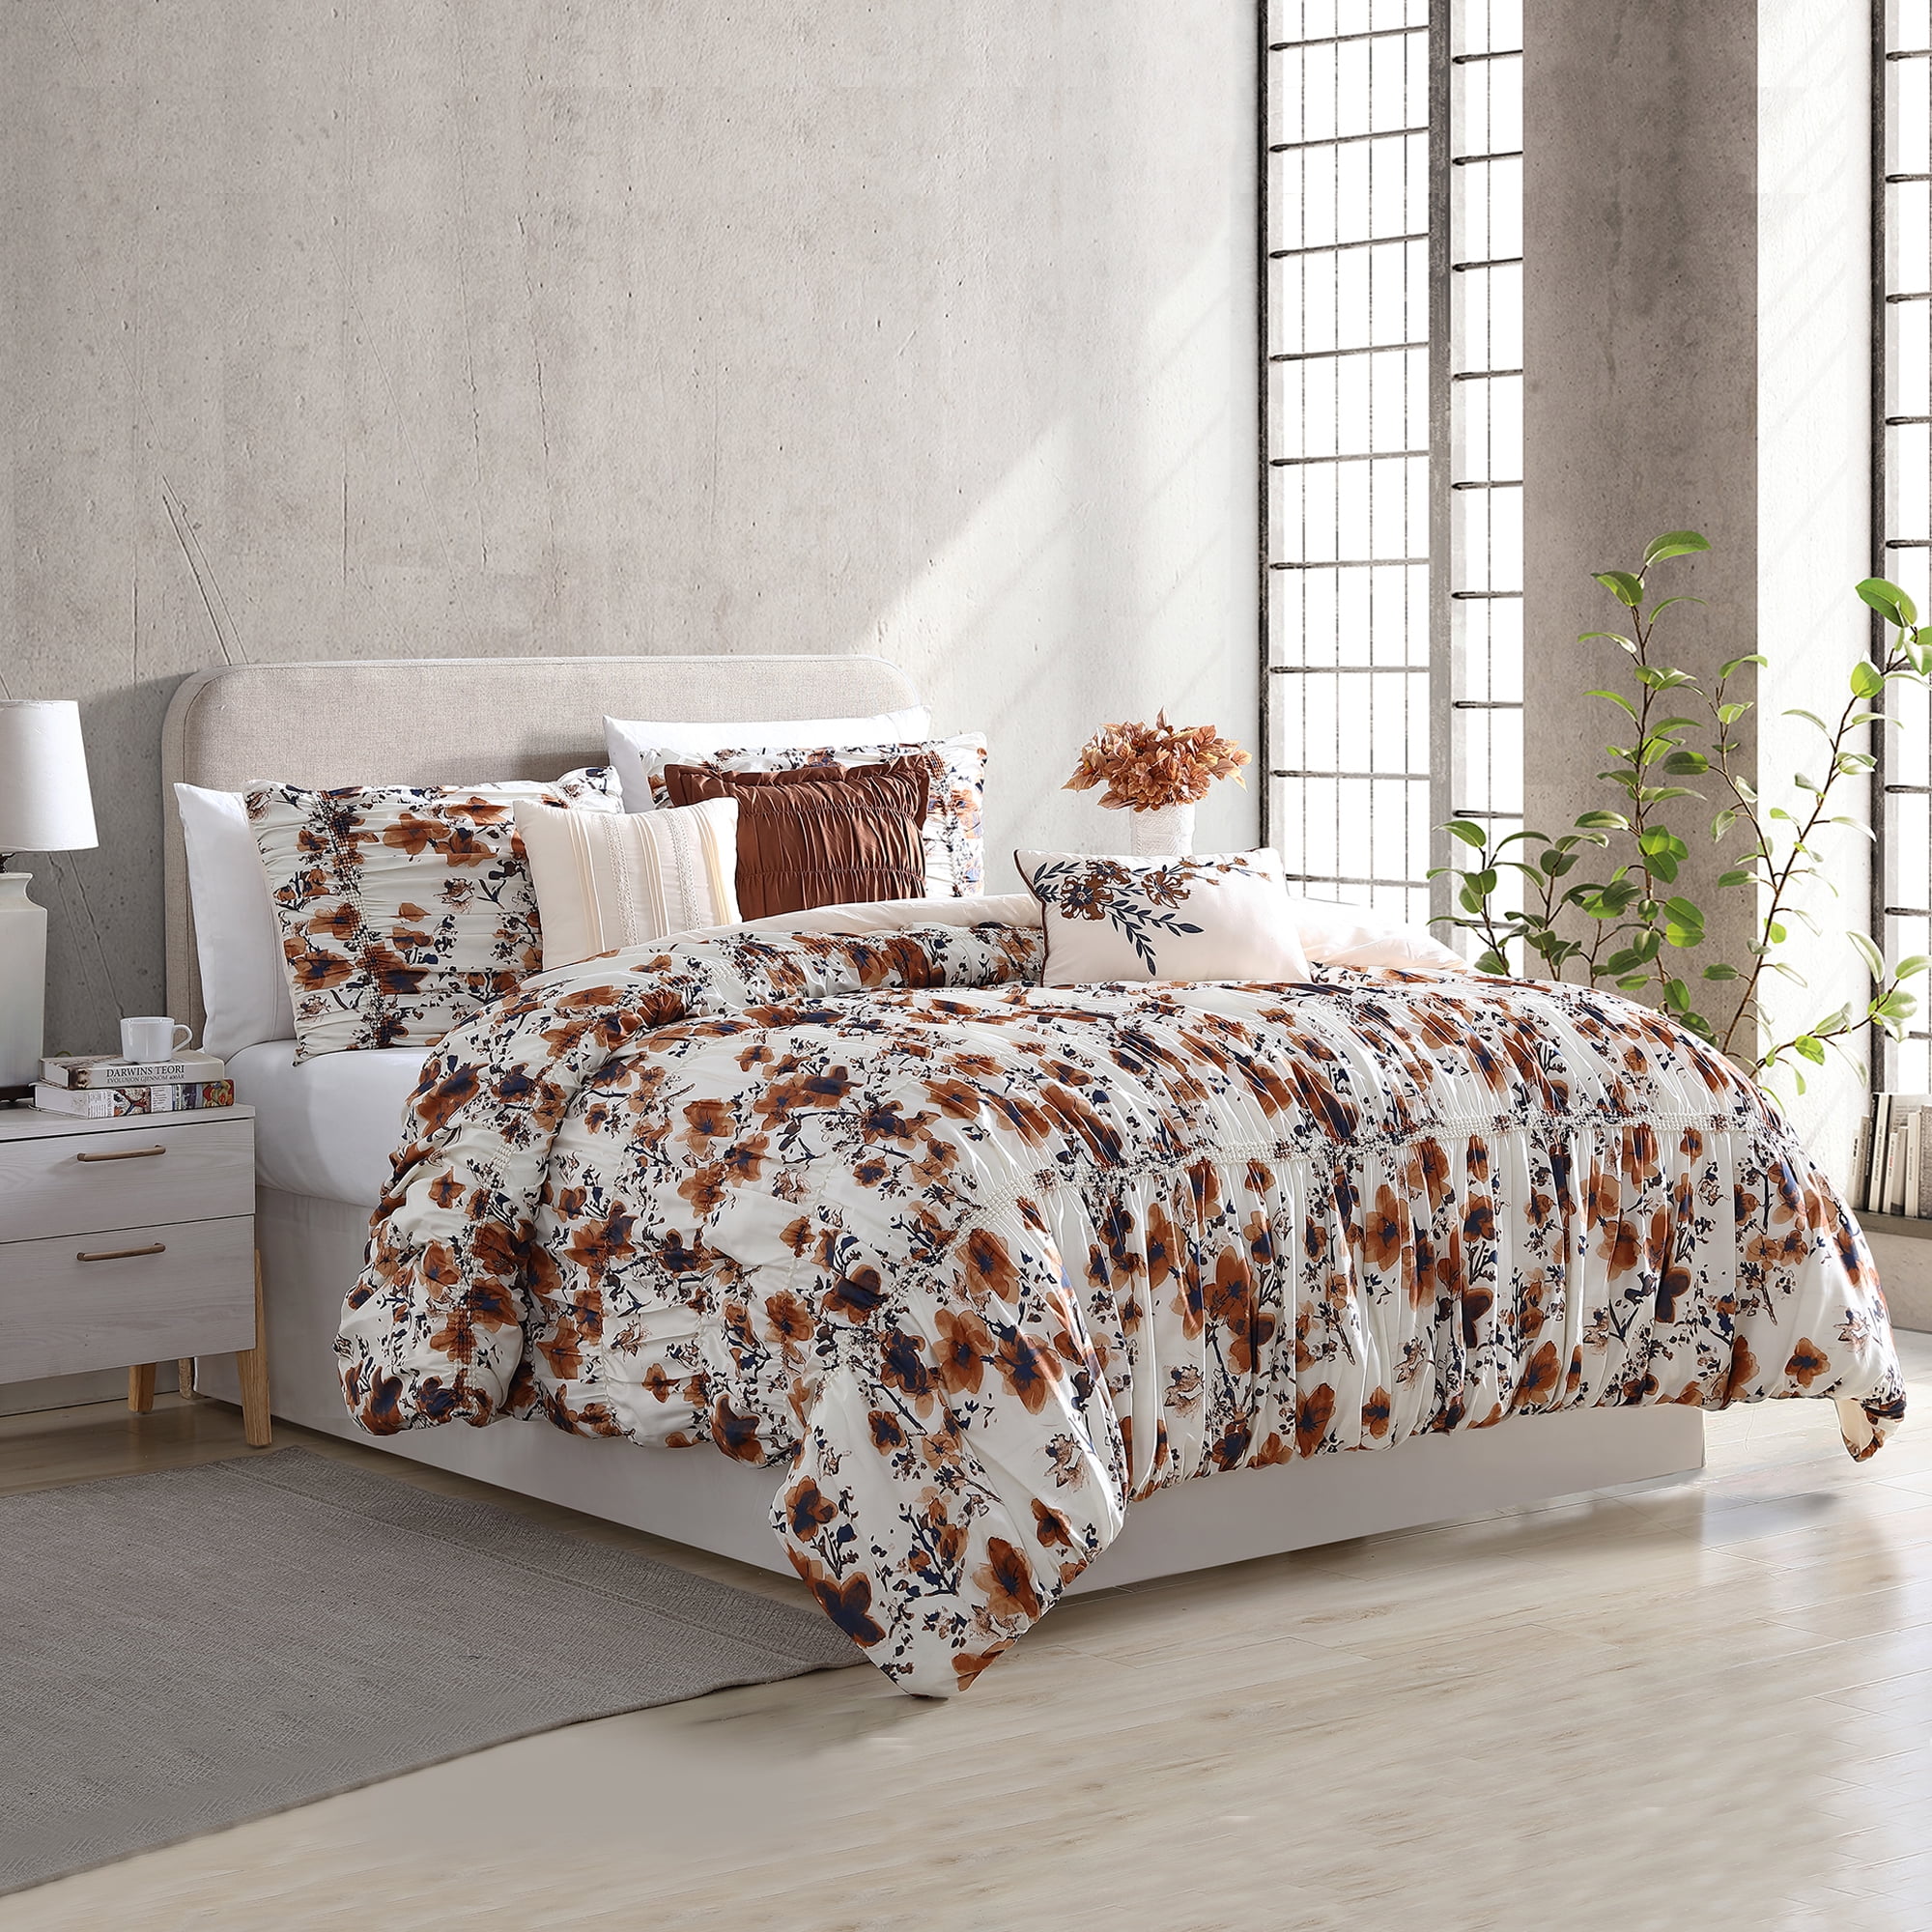 Full//Queen The Lakeside Collection Plaid Pumpkin Decorative Harvest Season Bed Comforter